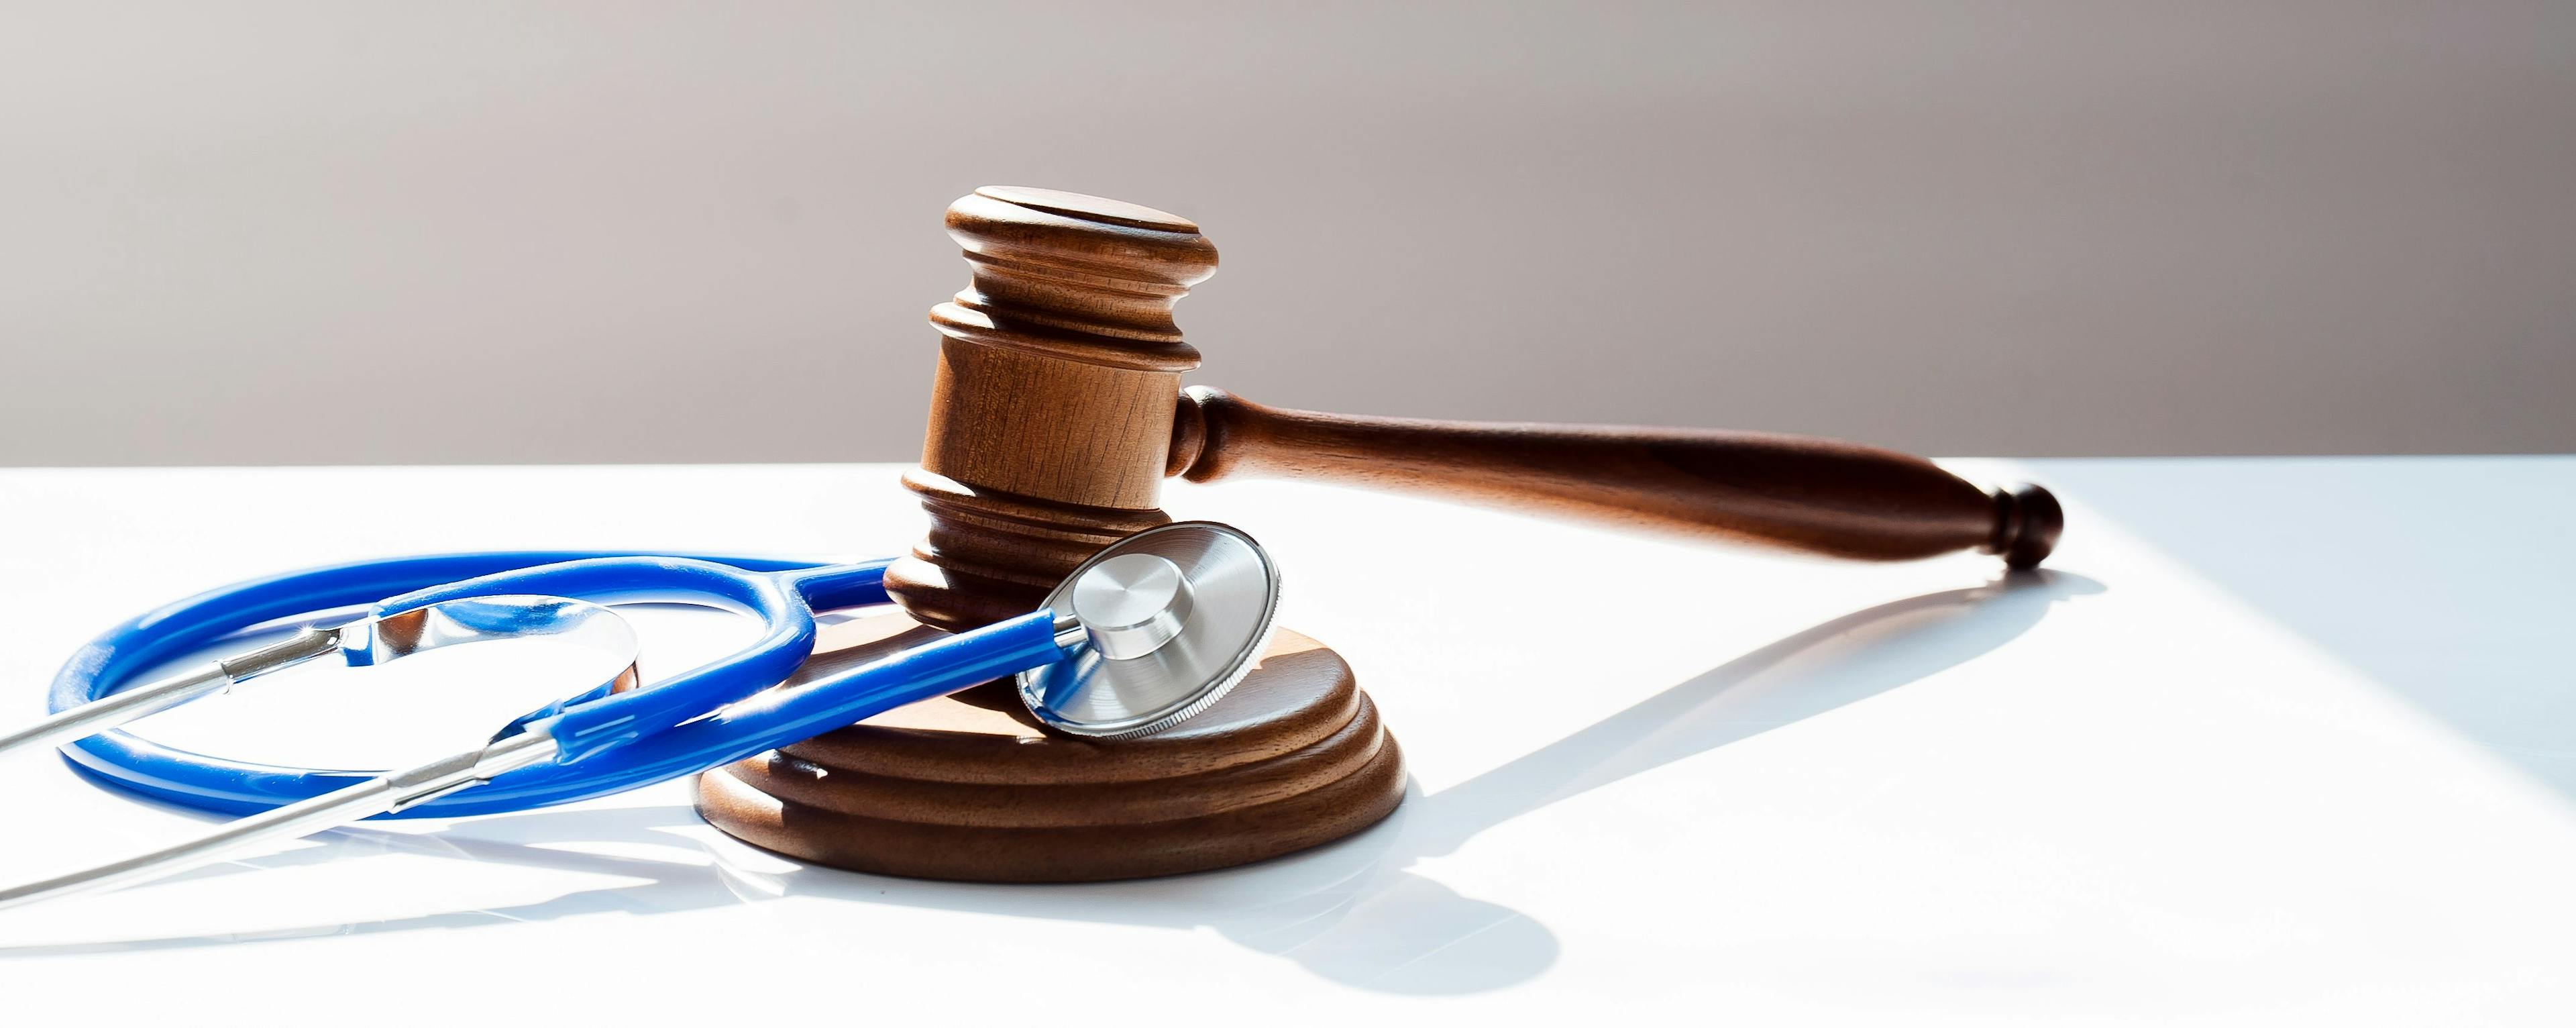 Employment law: What is affecting veterinary medicine? 